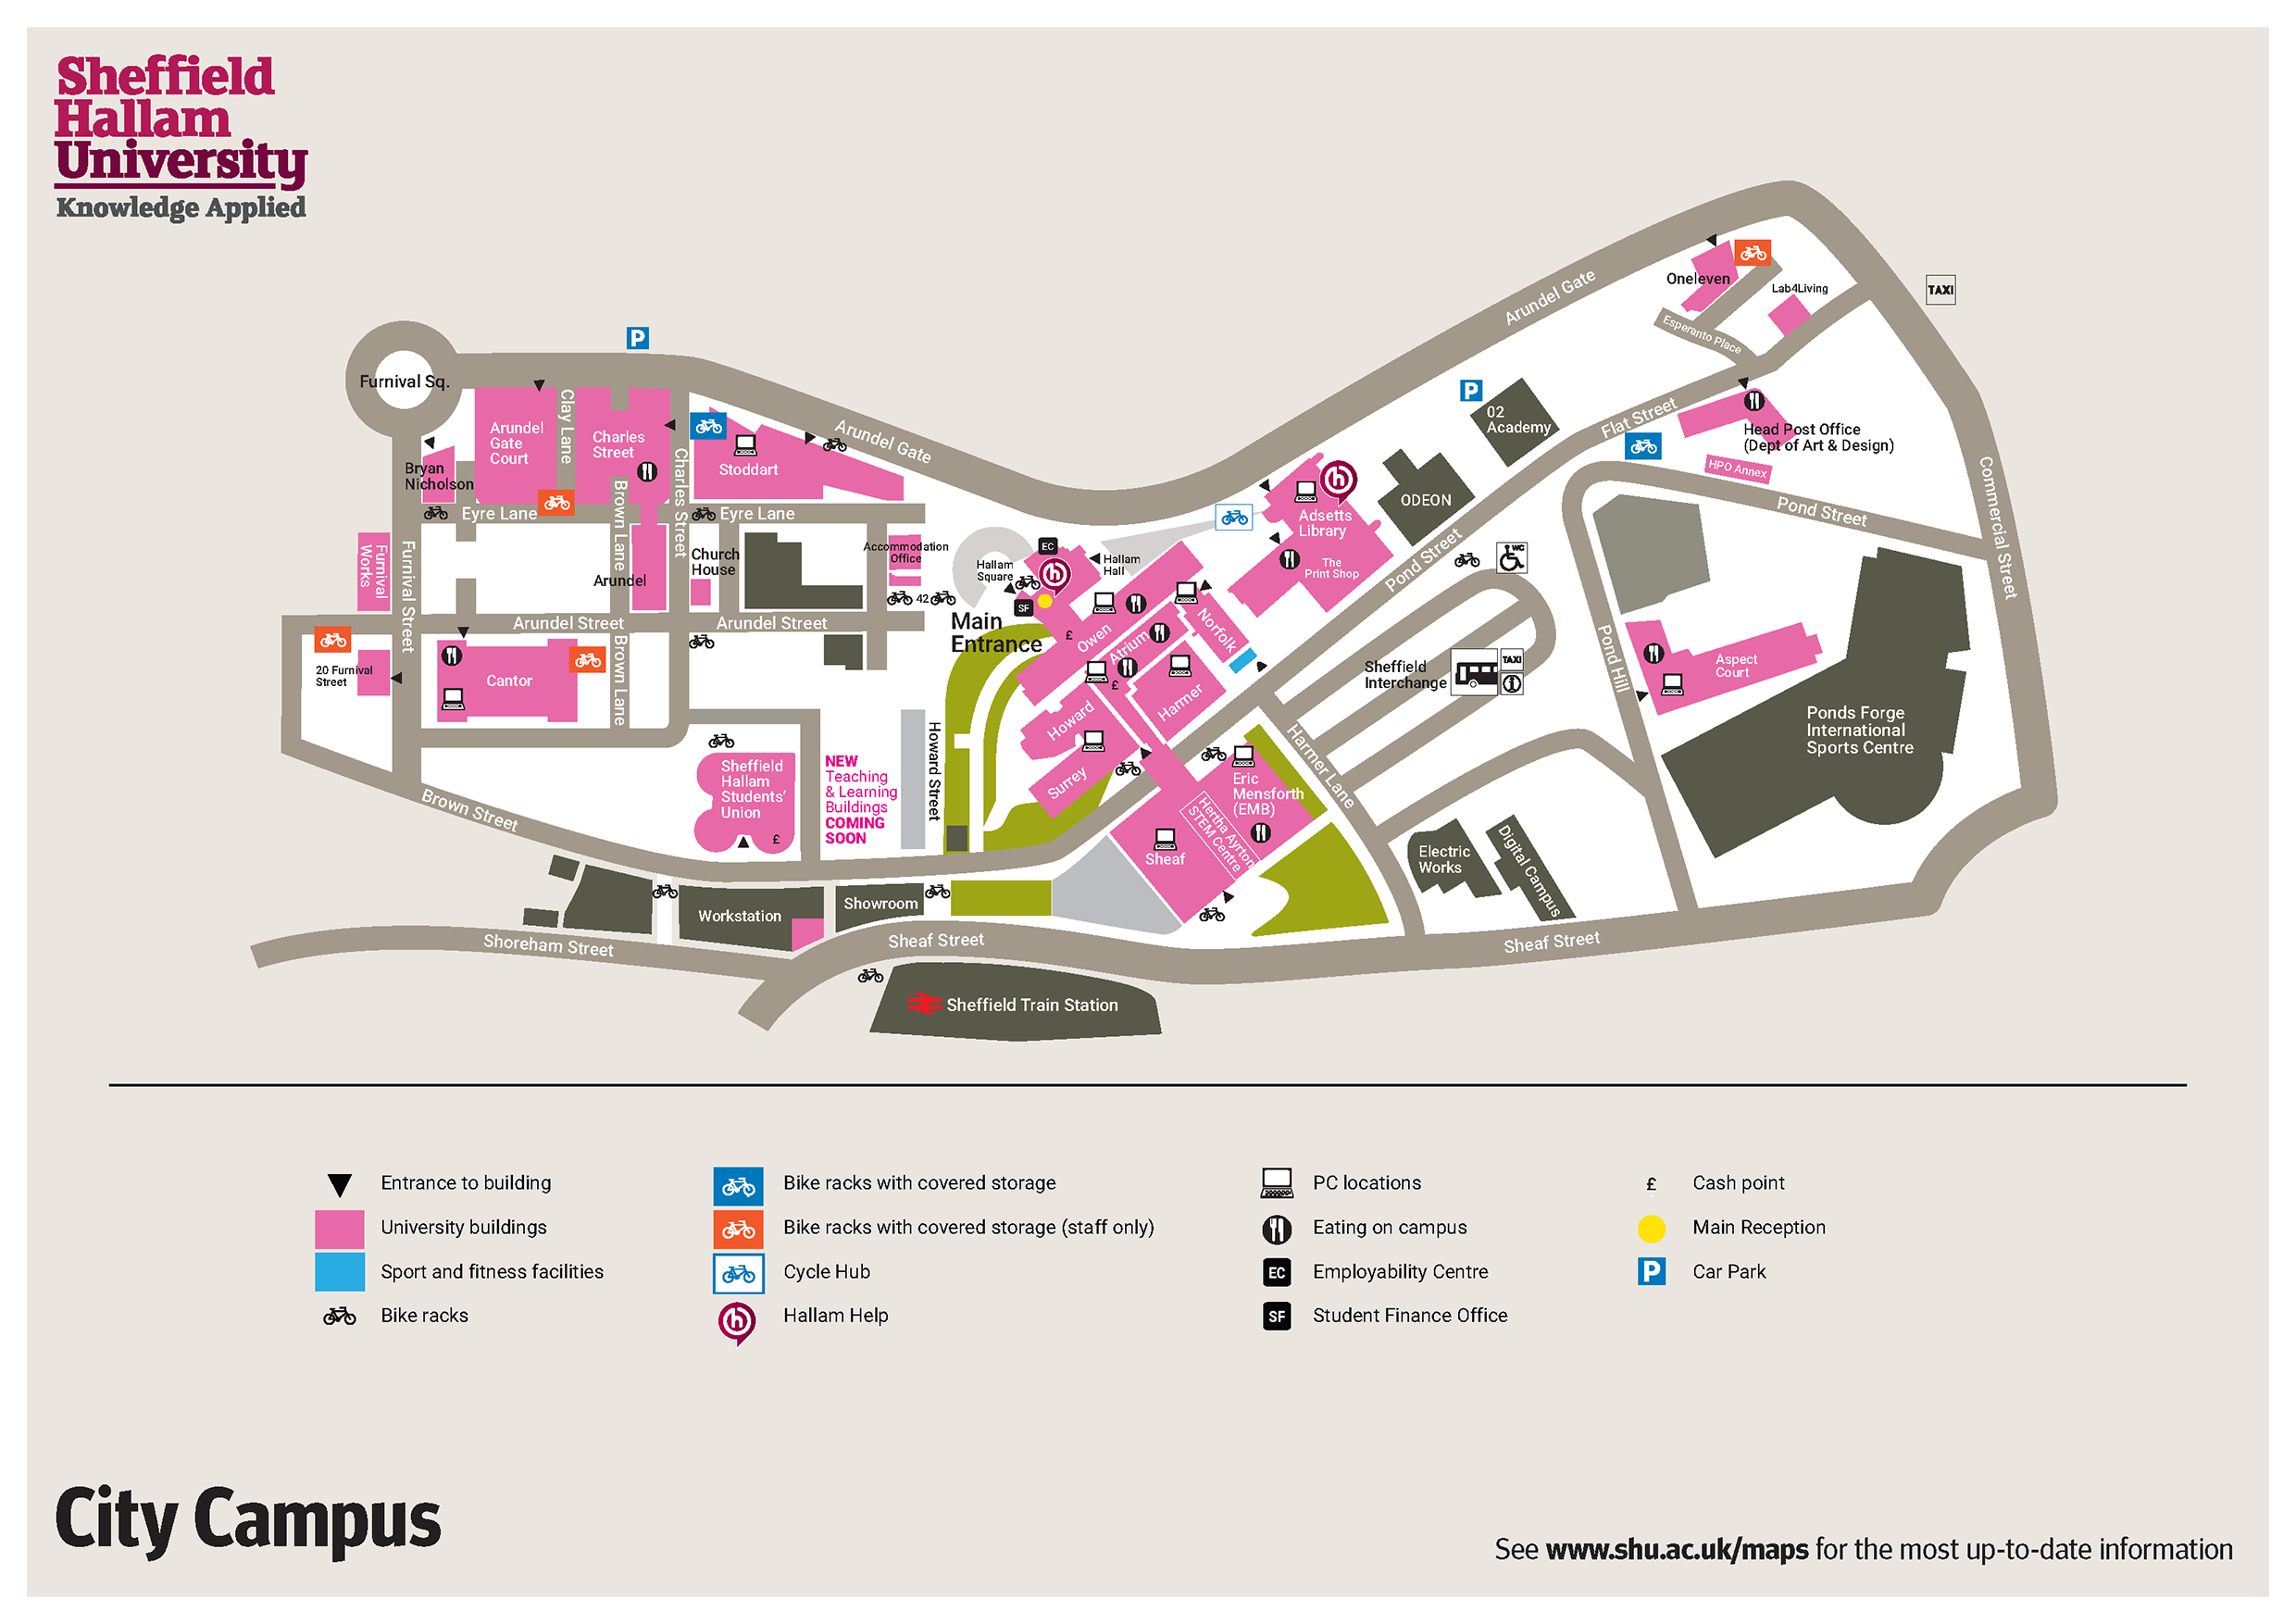 Map of the City Campus